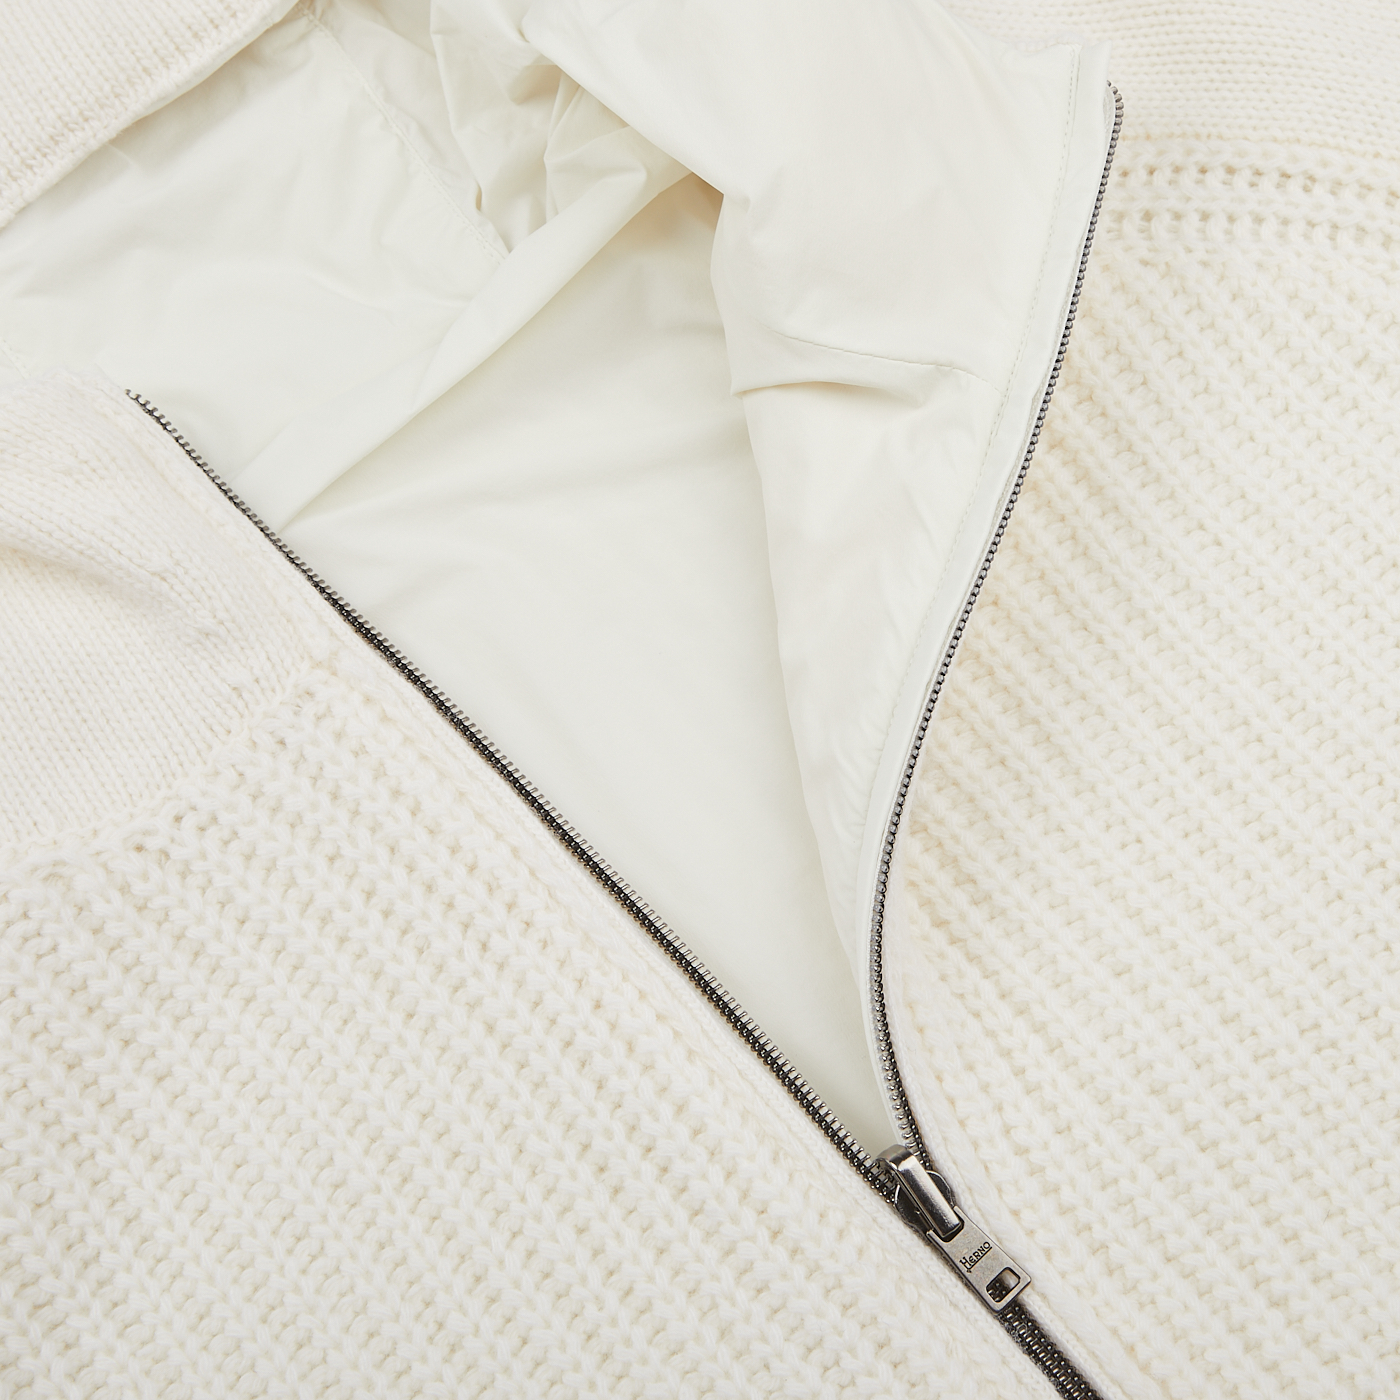 Close-up of a white **Herno** **Cream Wool Nylon Reversible Knitted Jacket** crafted from virgin wool, featuring a silver zipper, partially unzipped to reveal a white fabric lining.